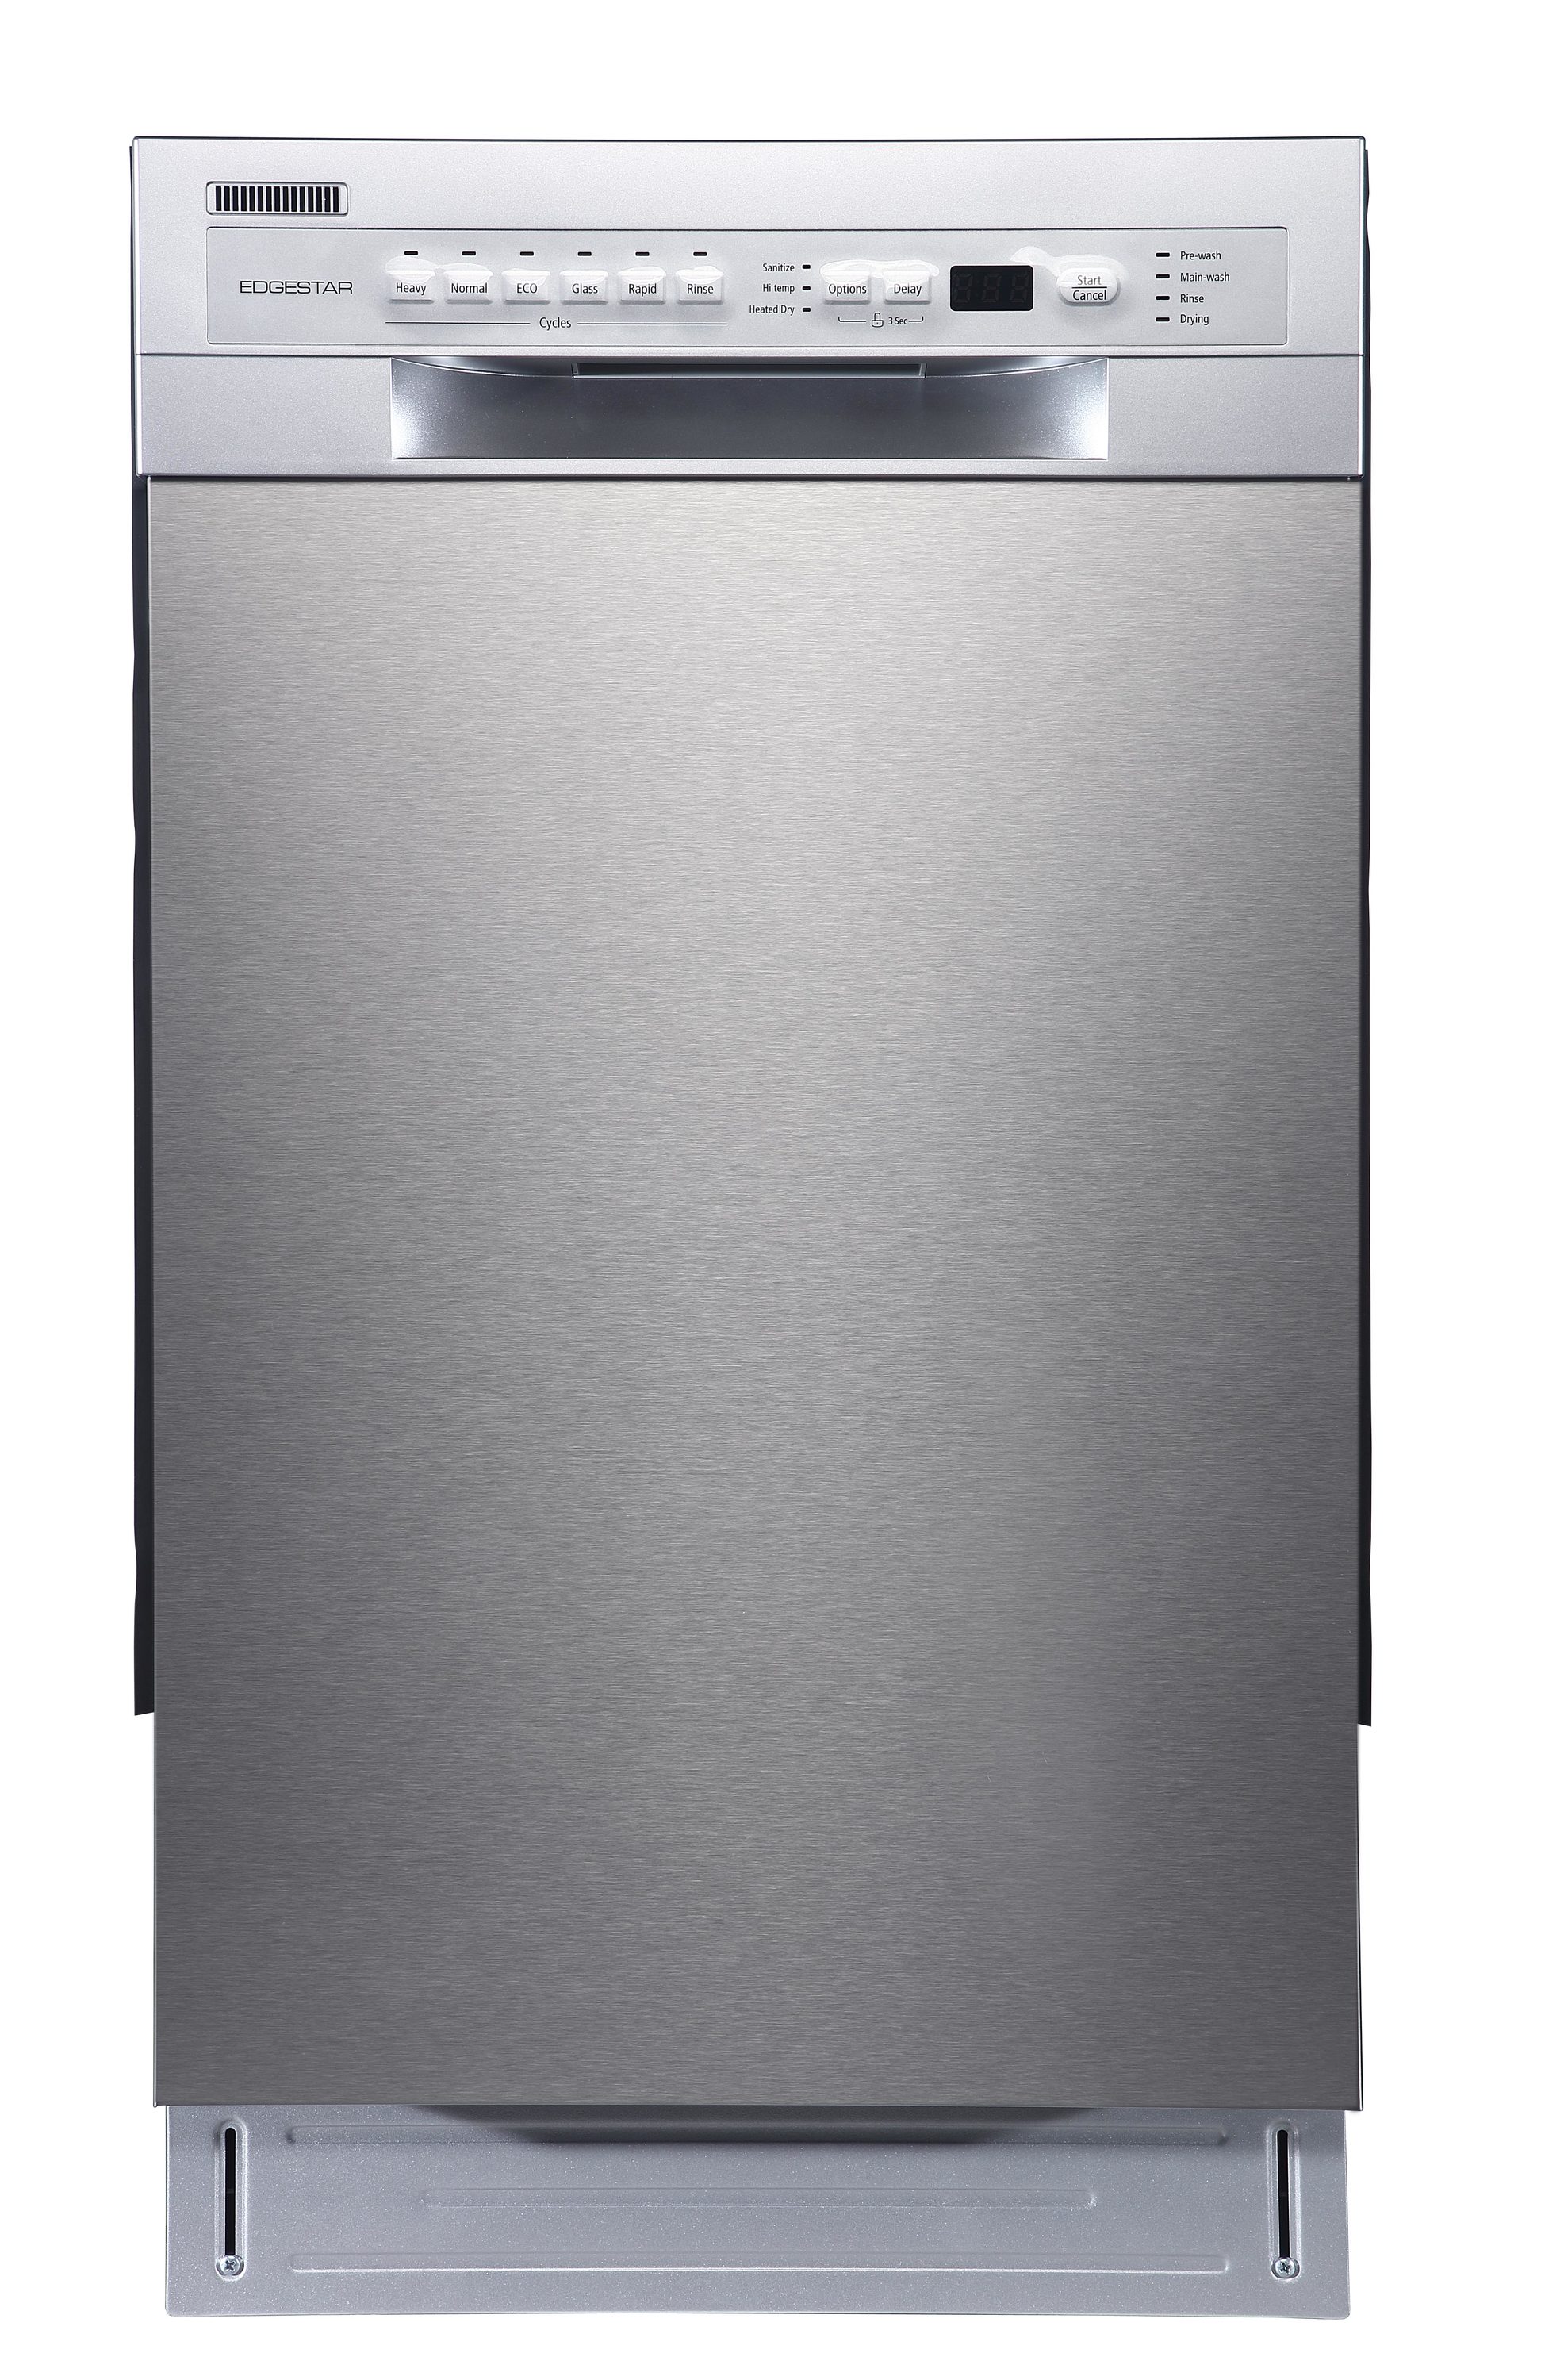 EdgeStar Front Control 18-in Built-In Dishwasher (Stainless Steel) ENERGY  STAR, 52-dBA